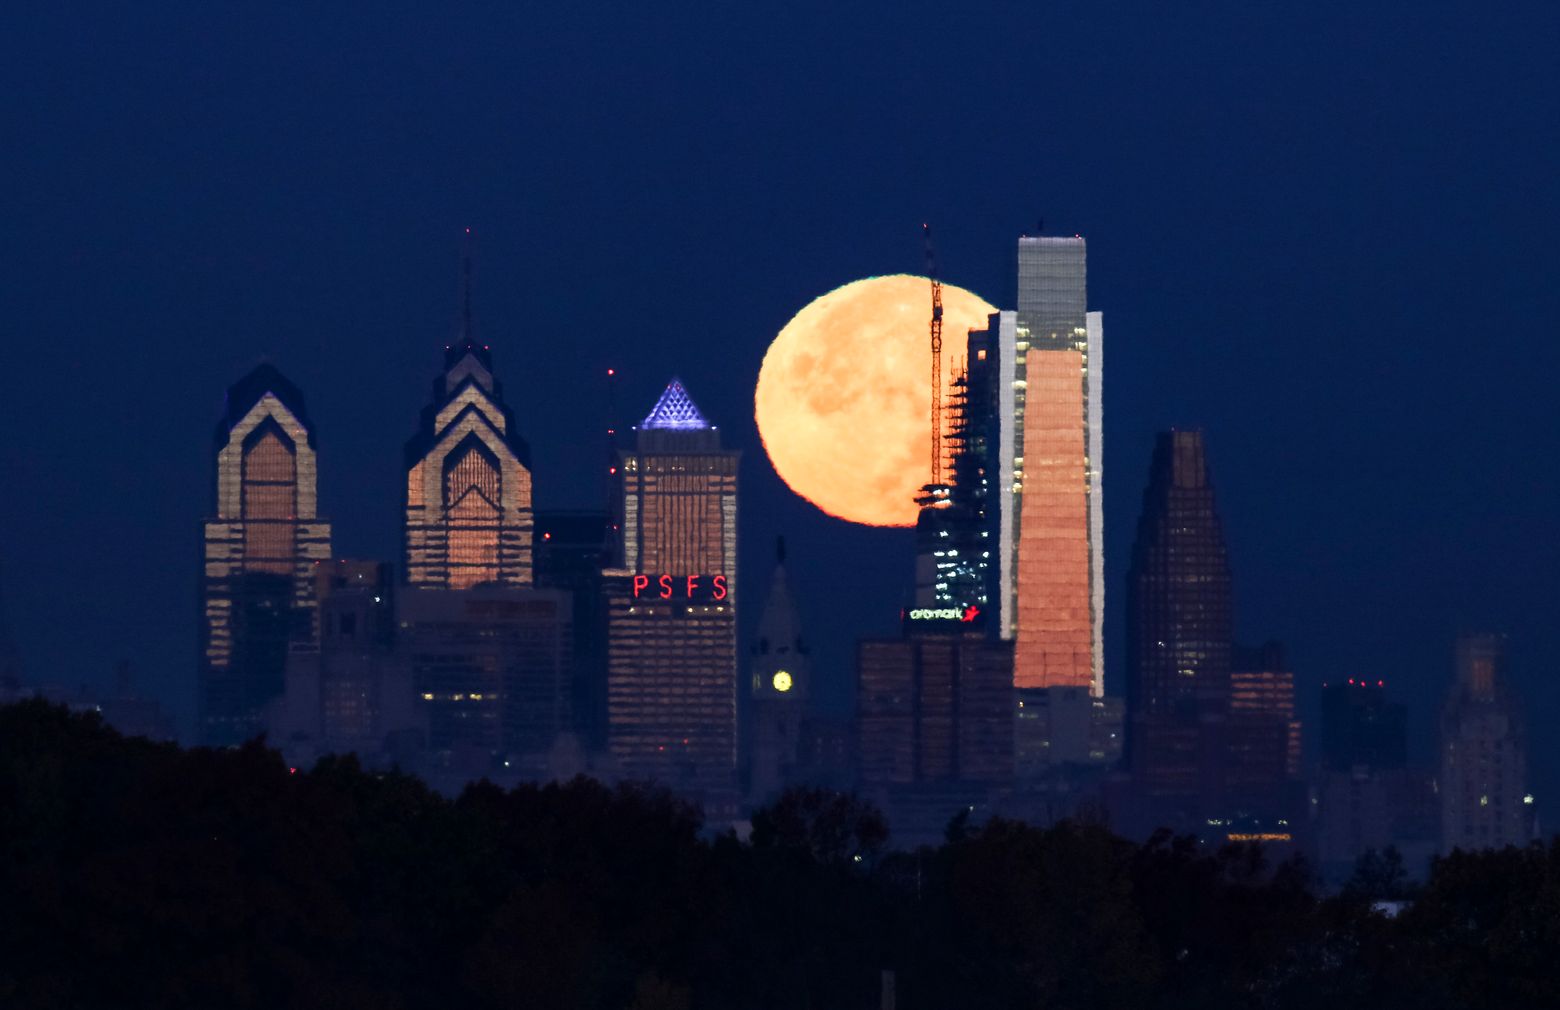 The supermoon sets behind the Philadelphia skyline on Monday, Nov. 14, 2016. The brightest moon in almost 69 years lights up the sky this week in a treat for star watchers around the globe. (AP Photo/Joseph Kaczmarek)